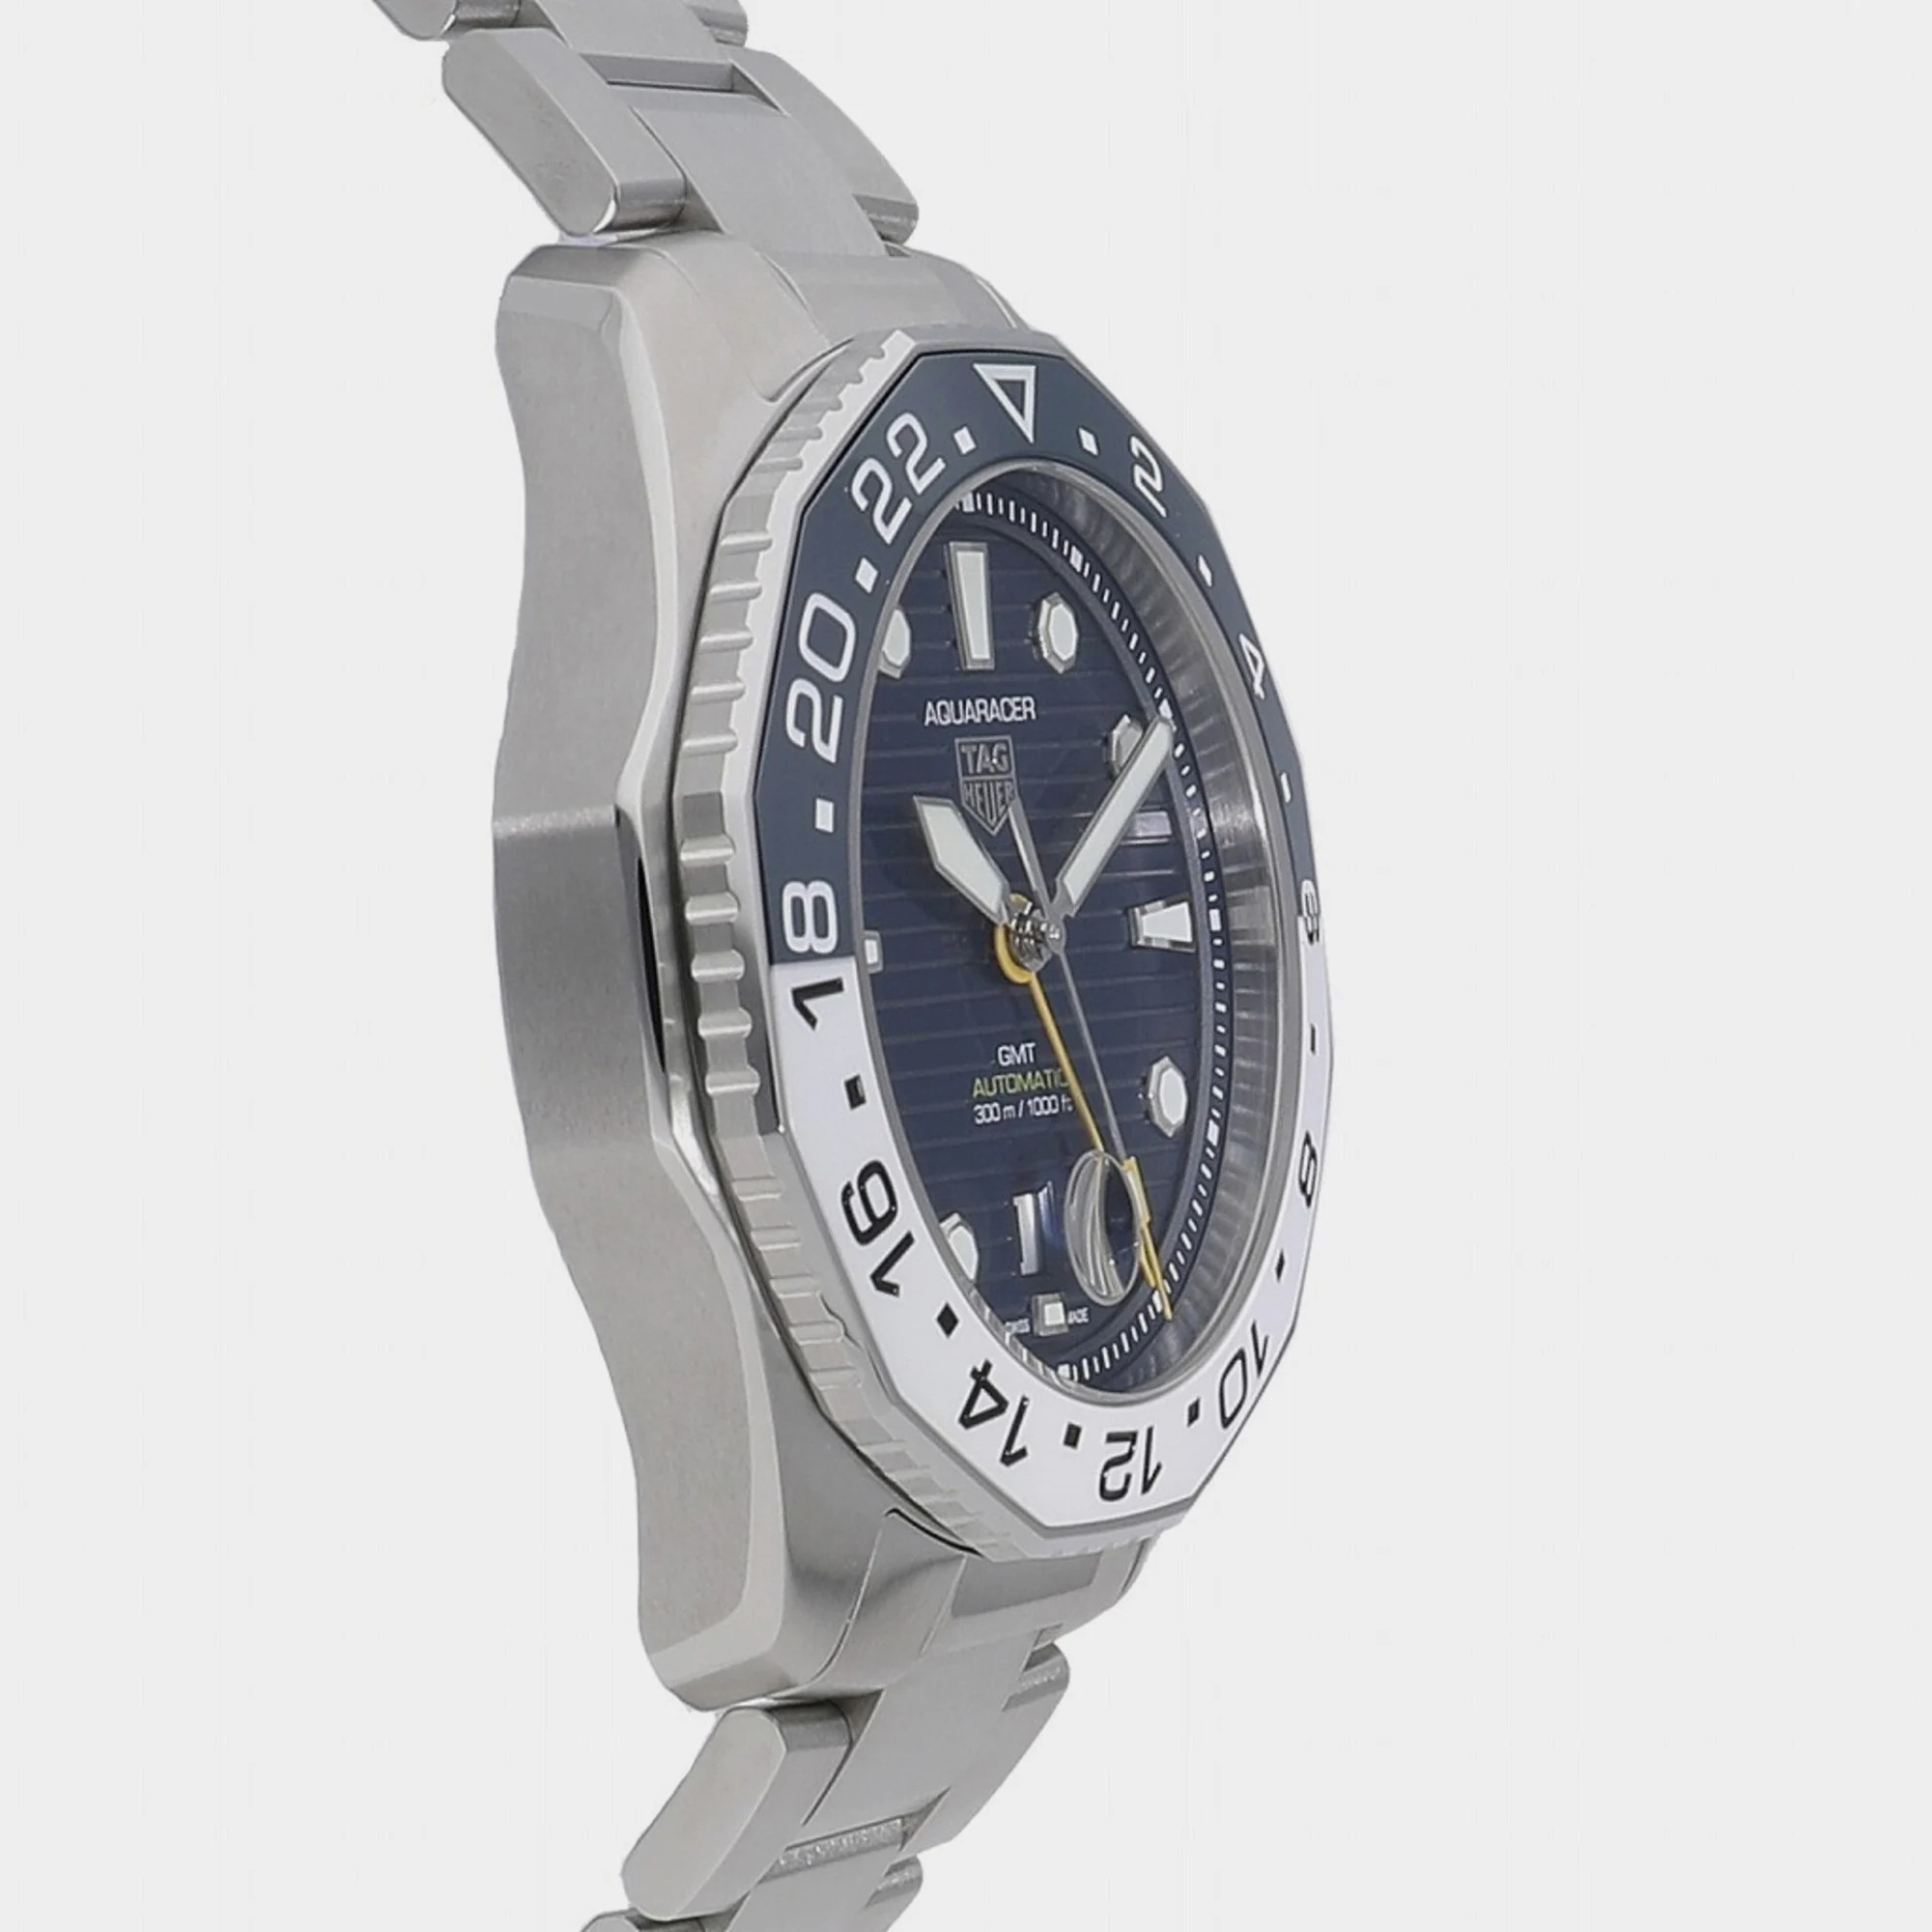 Tag Heuer Blue Stainless Steel Aquaracer WBP2010.BA0632 Automatic Men's Wristwatch 43 Mm